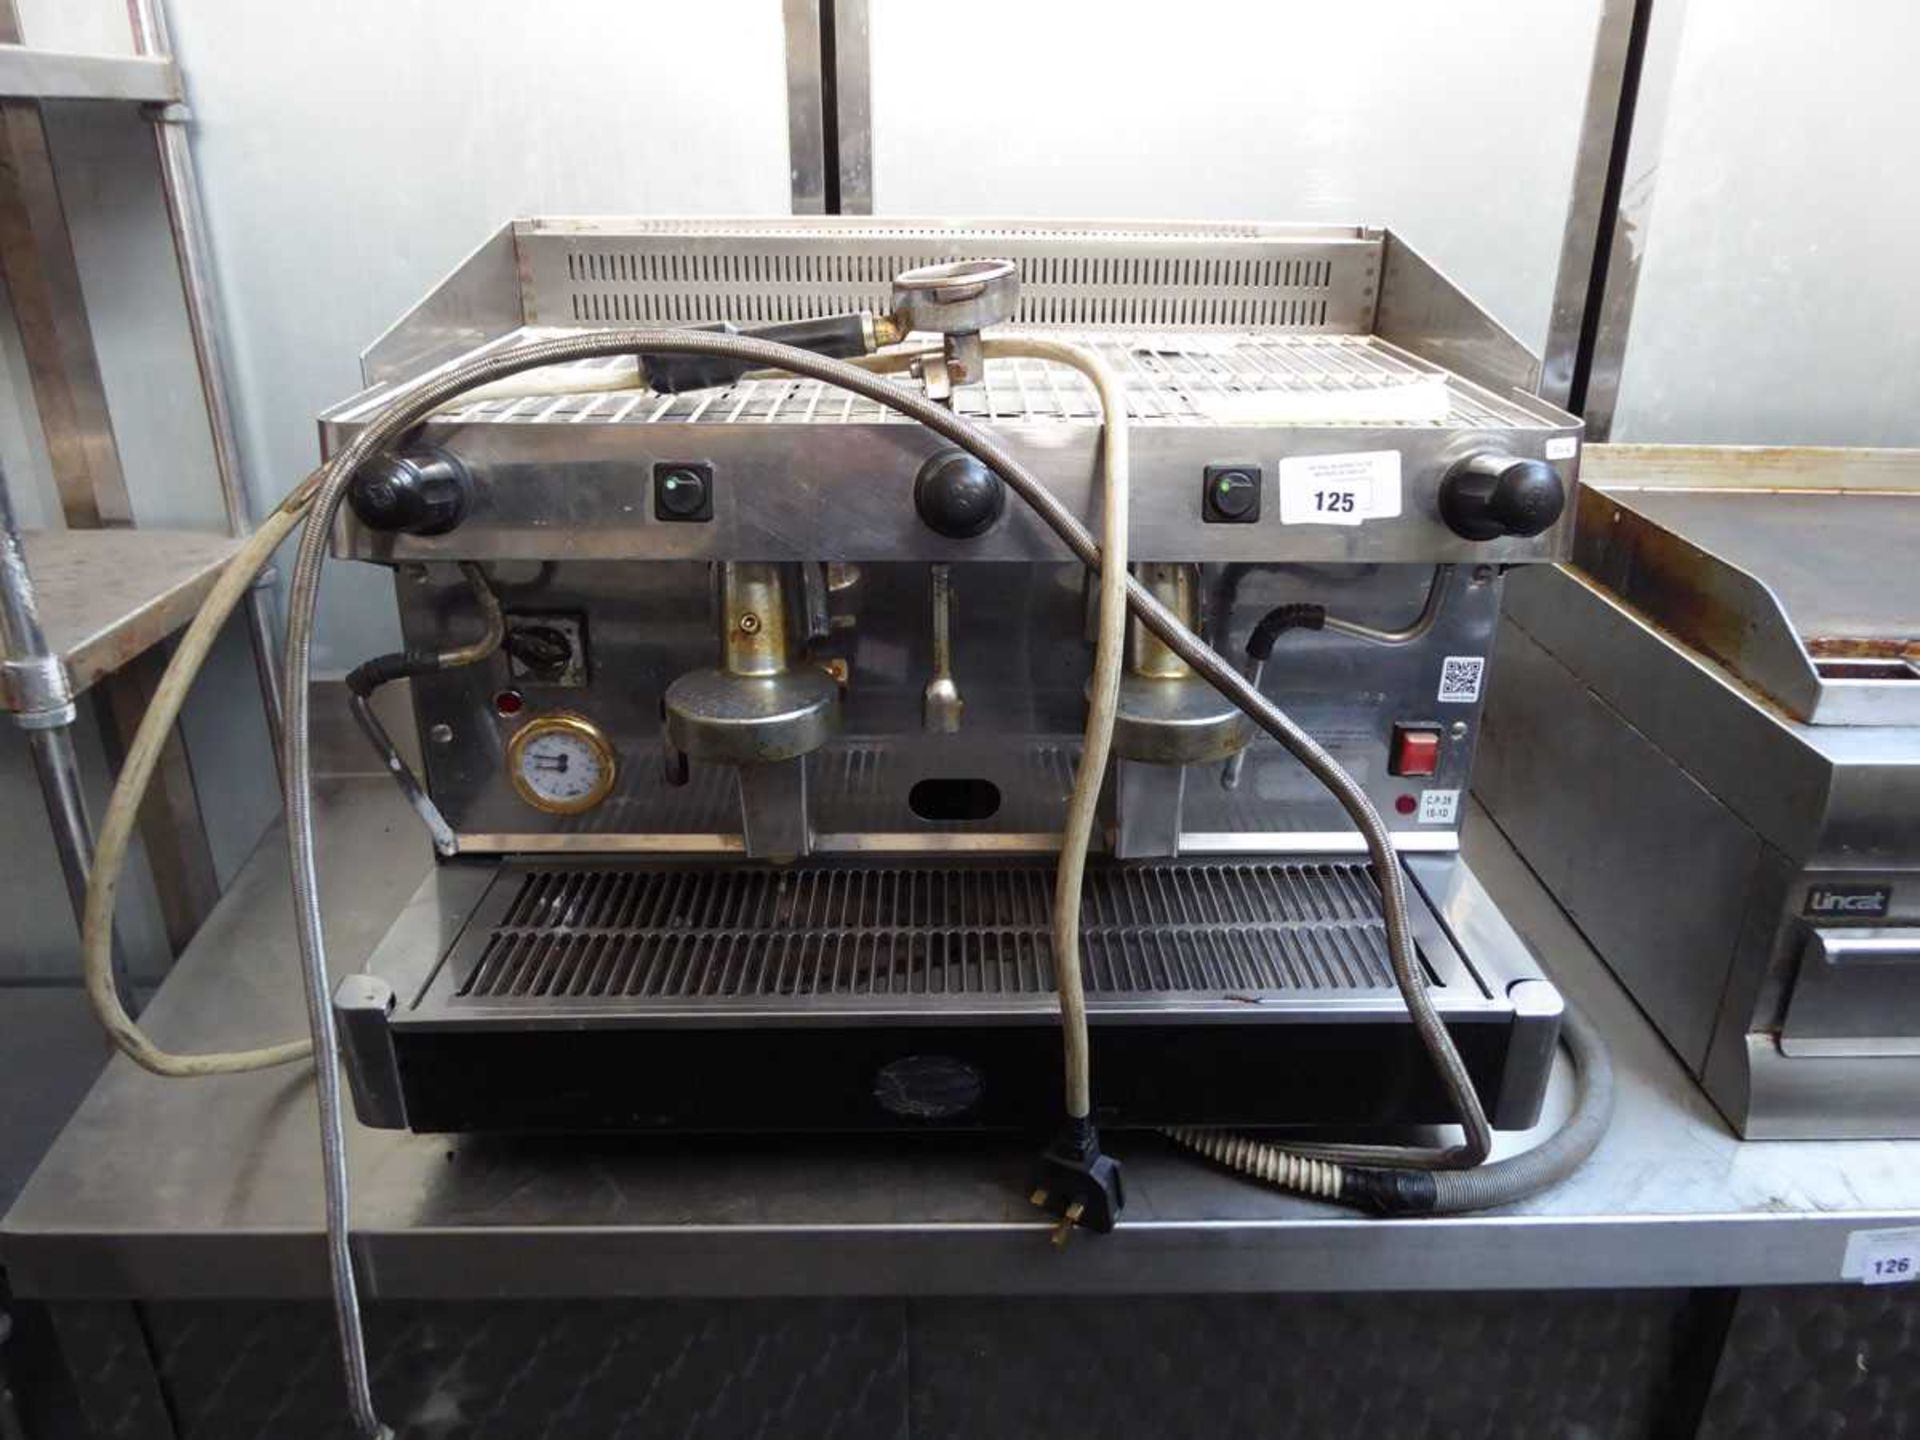 +VAT 70cm 2 group coffee machine with one group head (Failed electrical test)